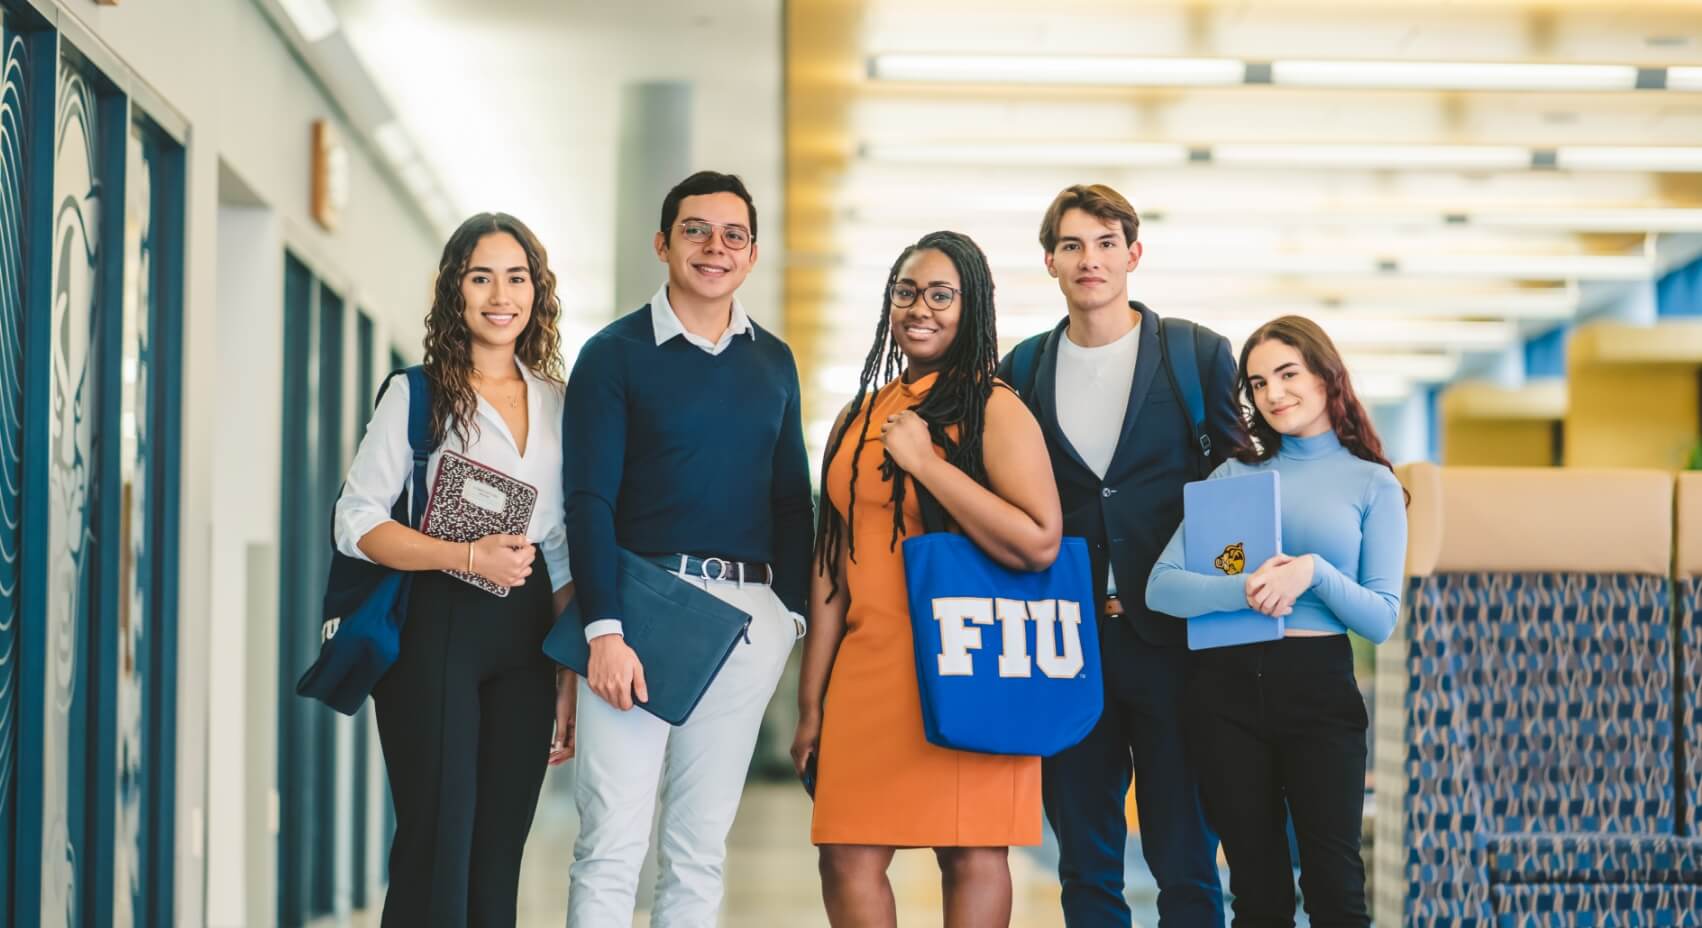 FIU students stand proud at the College of Business